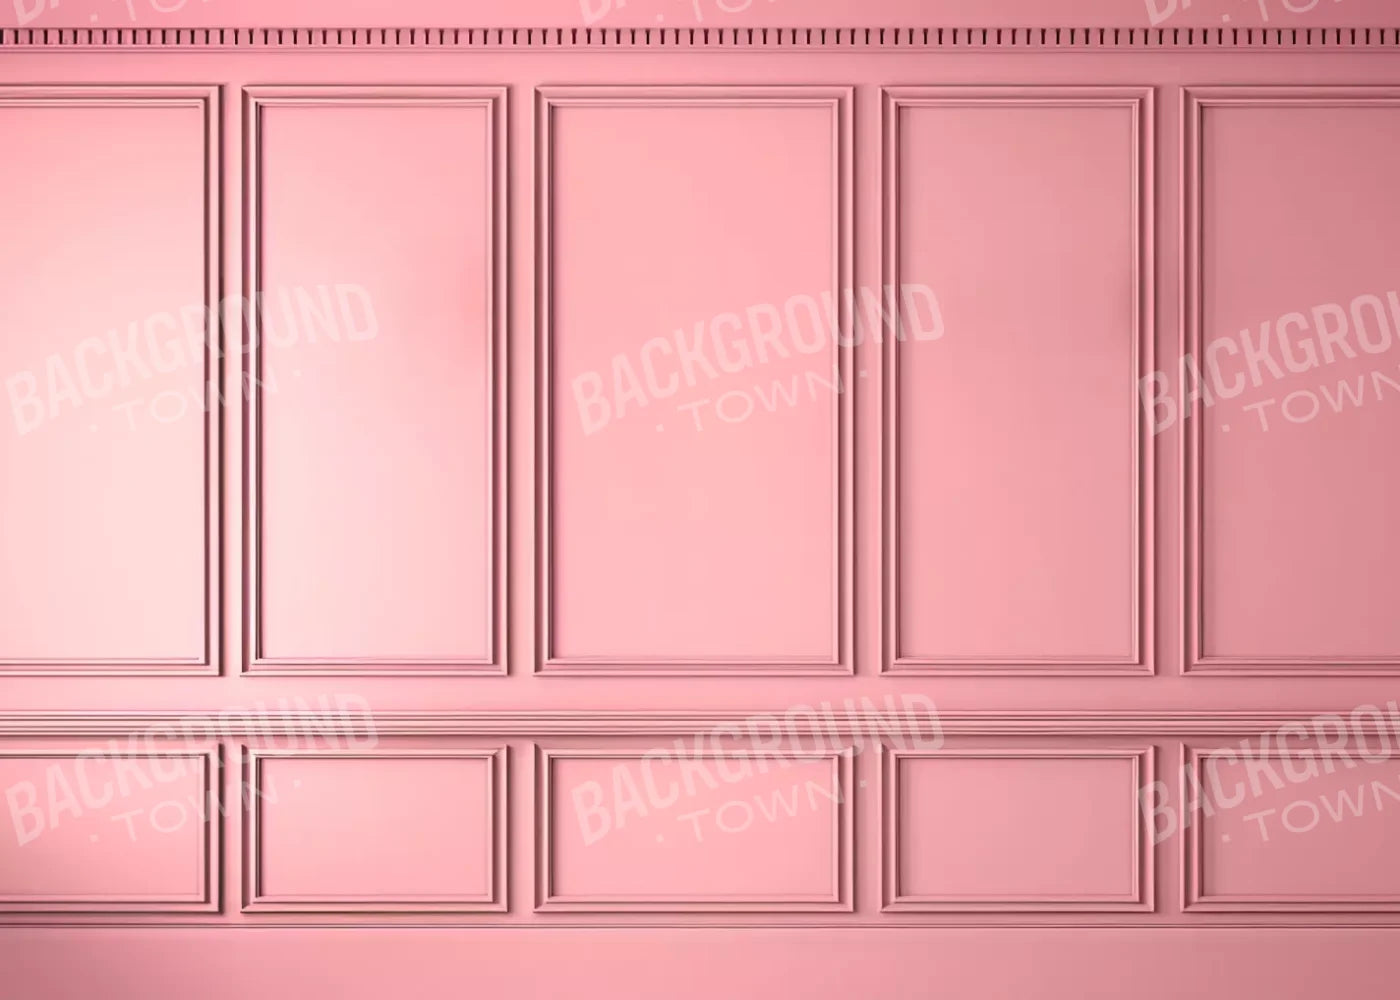 Carrie Pink 2 7’X5’ Ultracloth (84 X 60 Inch) Backdrop